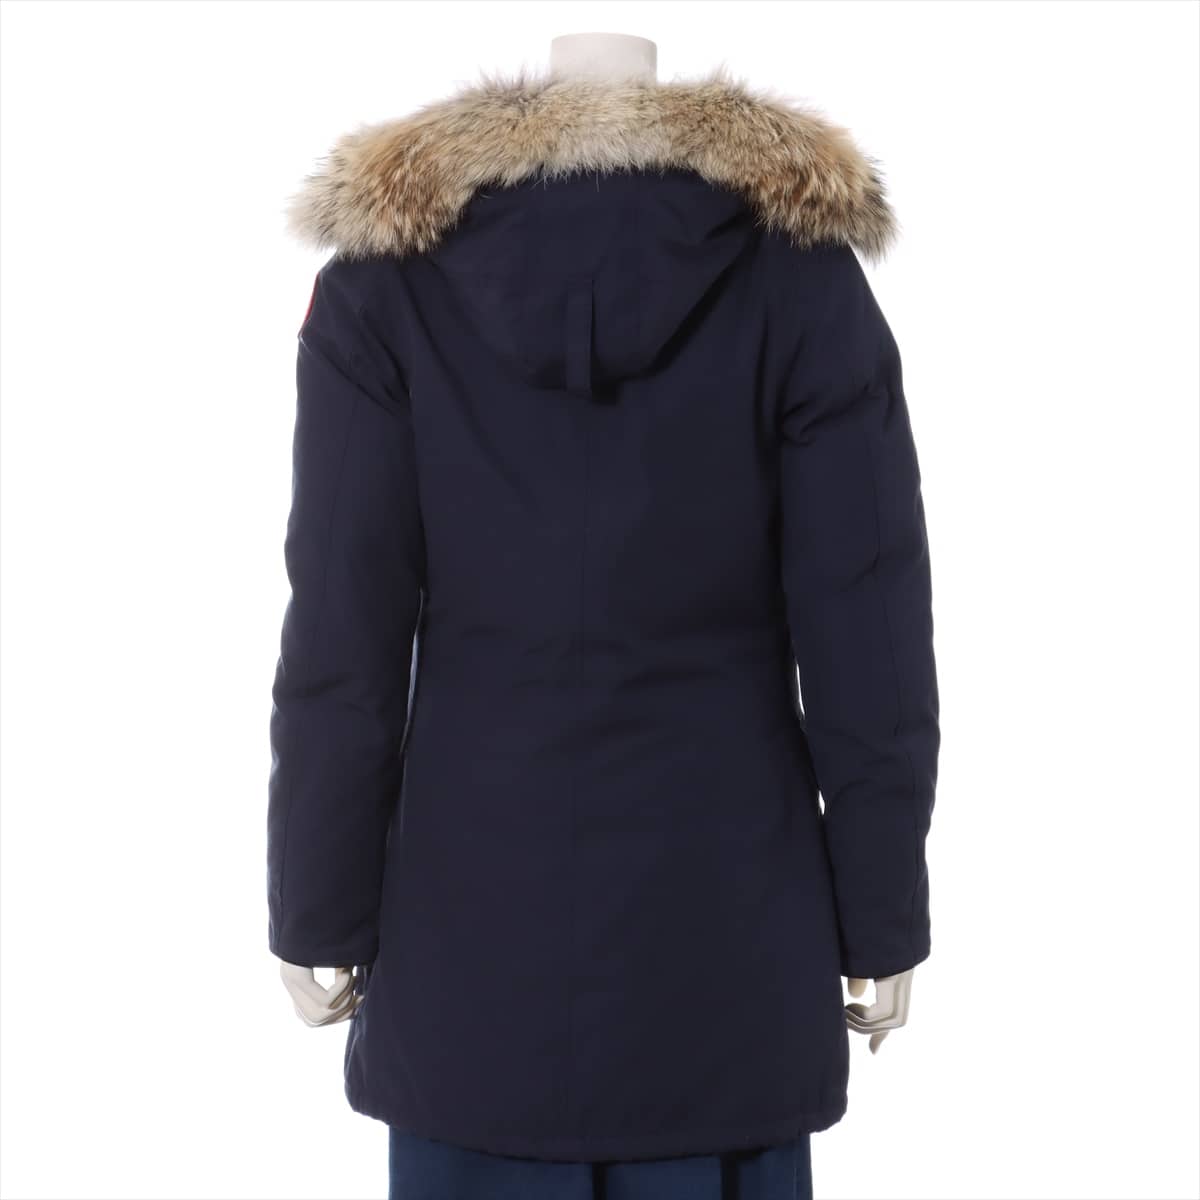 Canada Goose BRONTE Cotton & polyester Down coat S Ladies' Navy blue  2603JL Sotheby